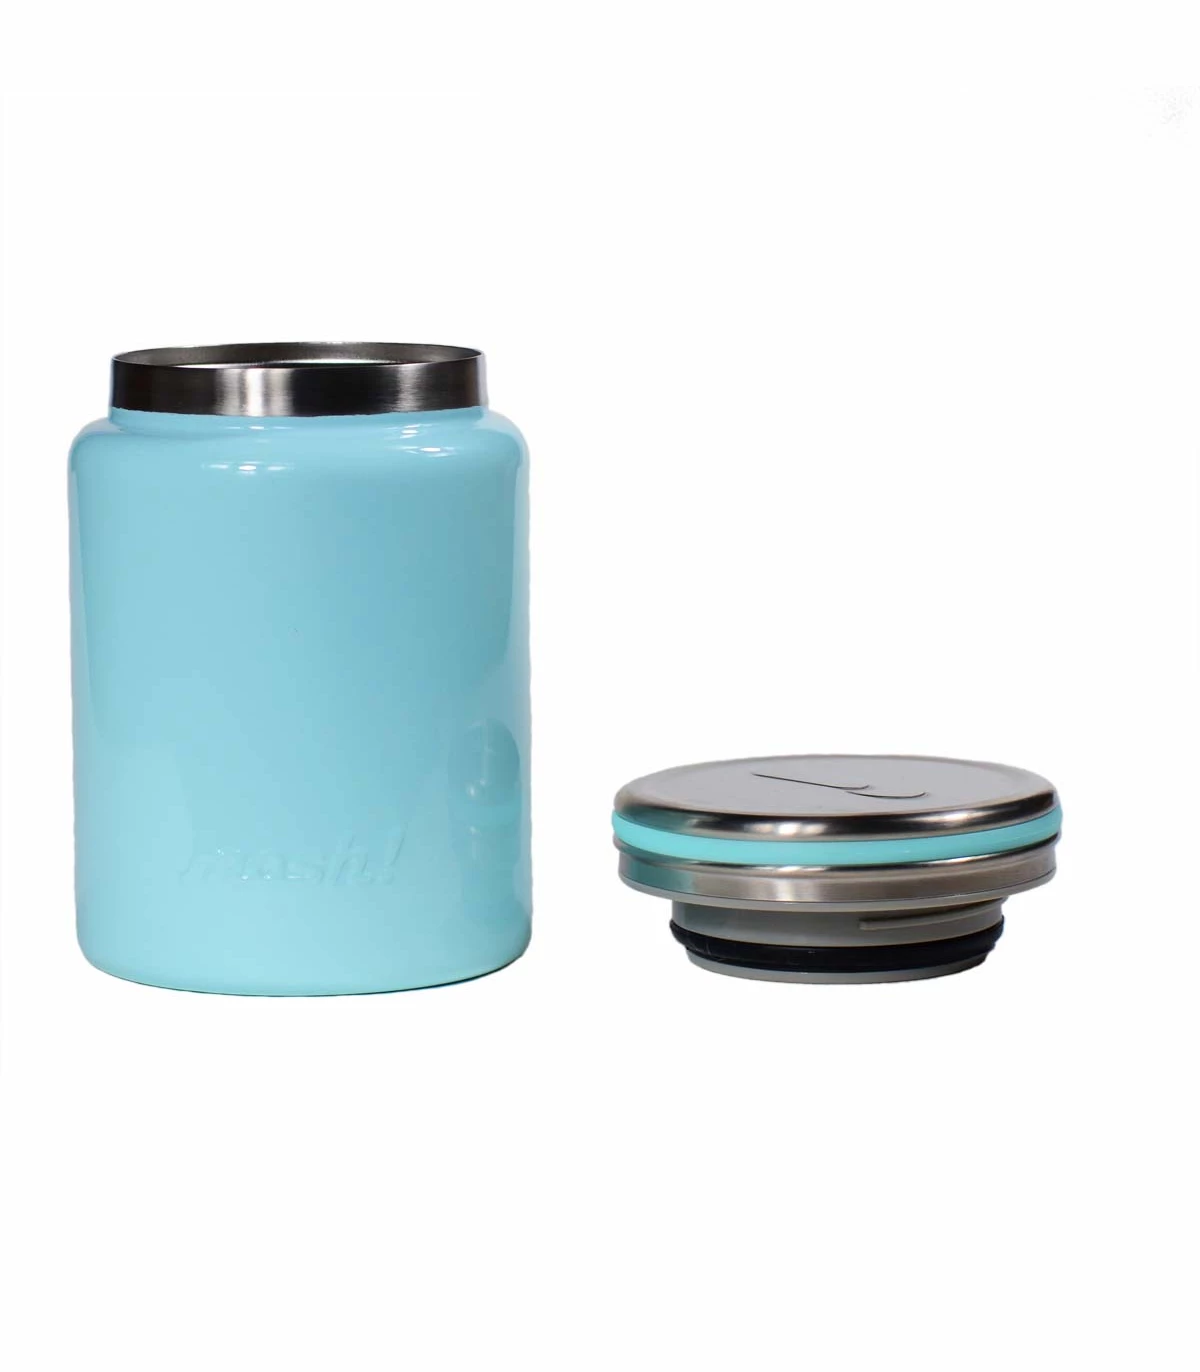 https://takaterra.com/3806-superlarge_default/insulated-food-container-stainless-steel-blue-mosh.webp